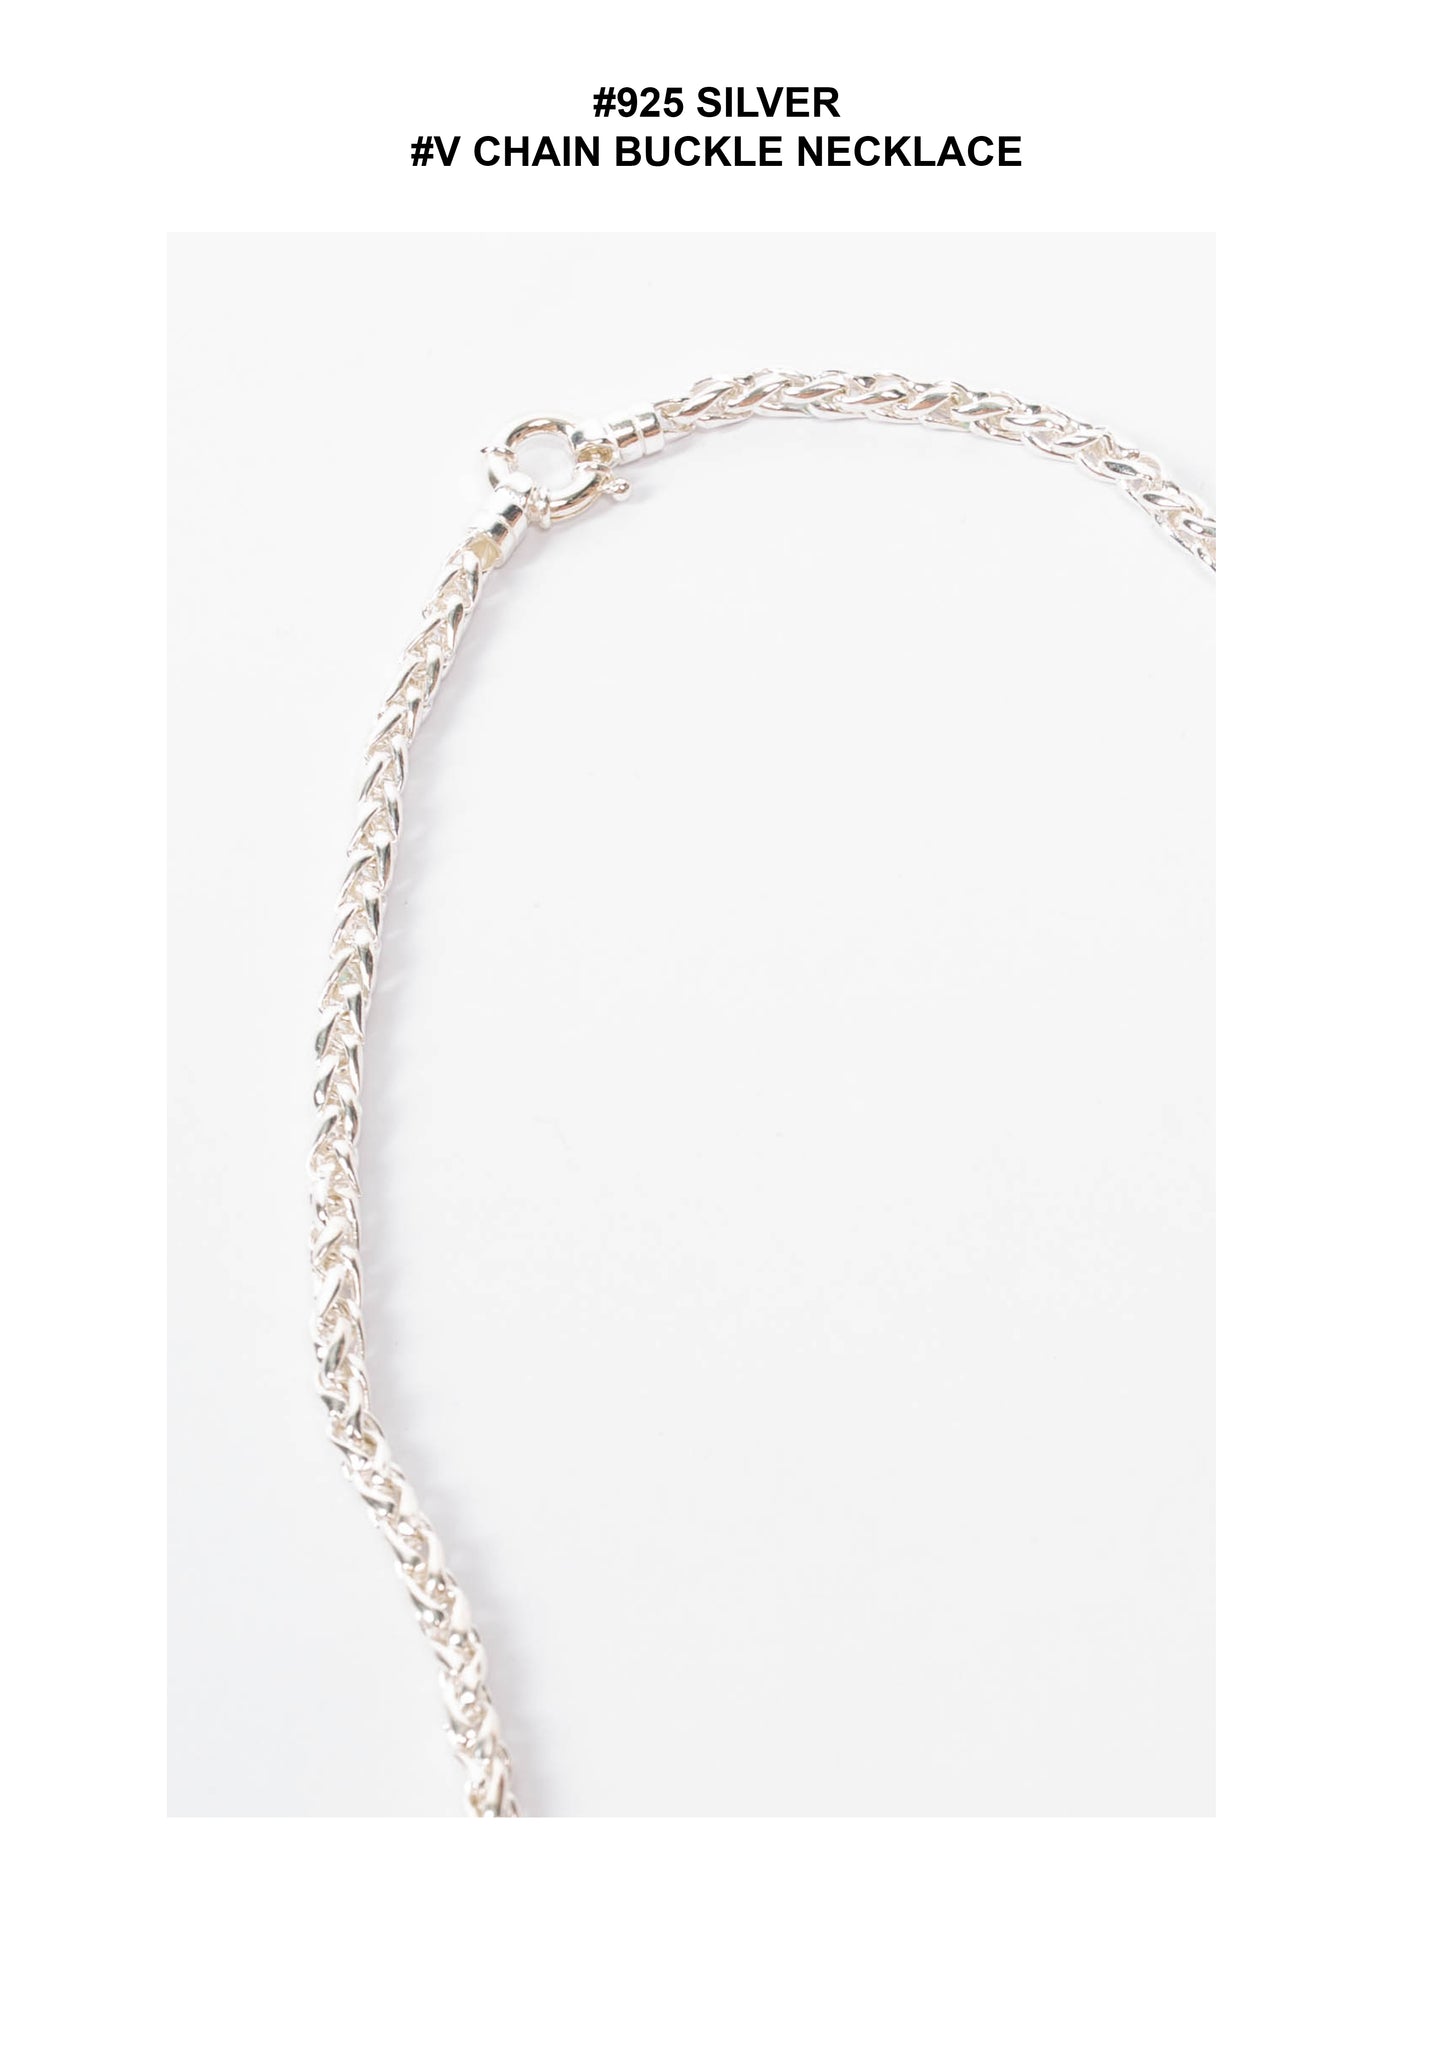 925 Silver V Chain Buckle Necklace